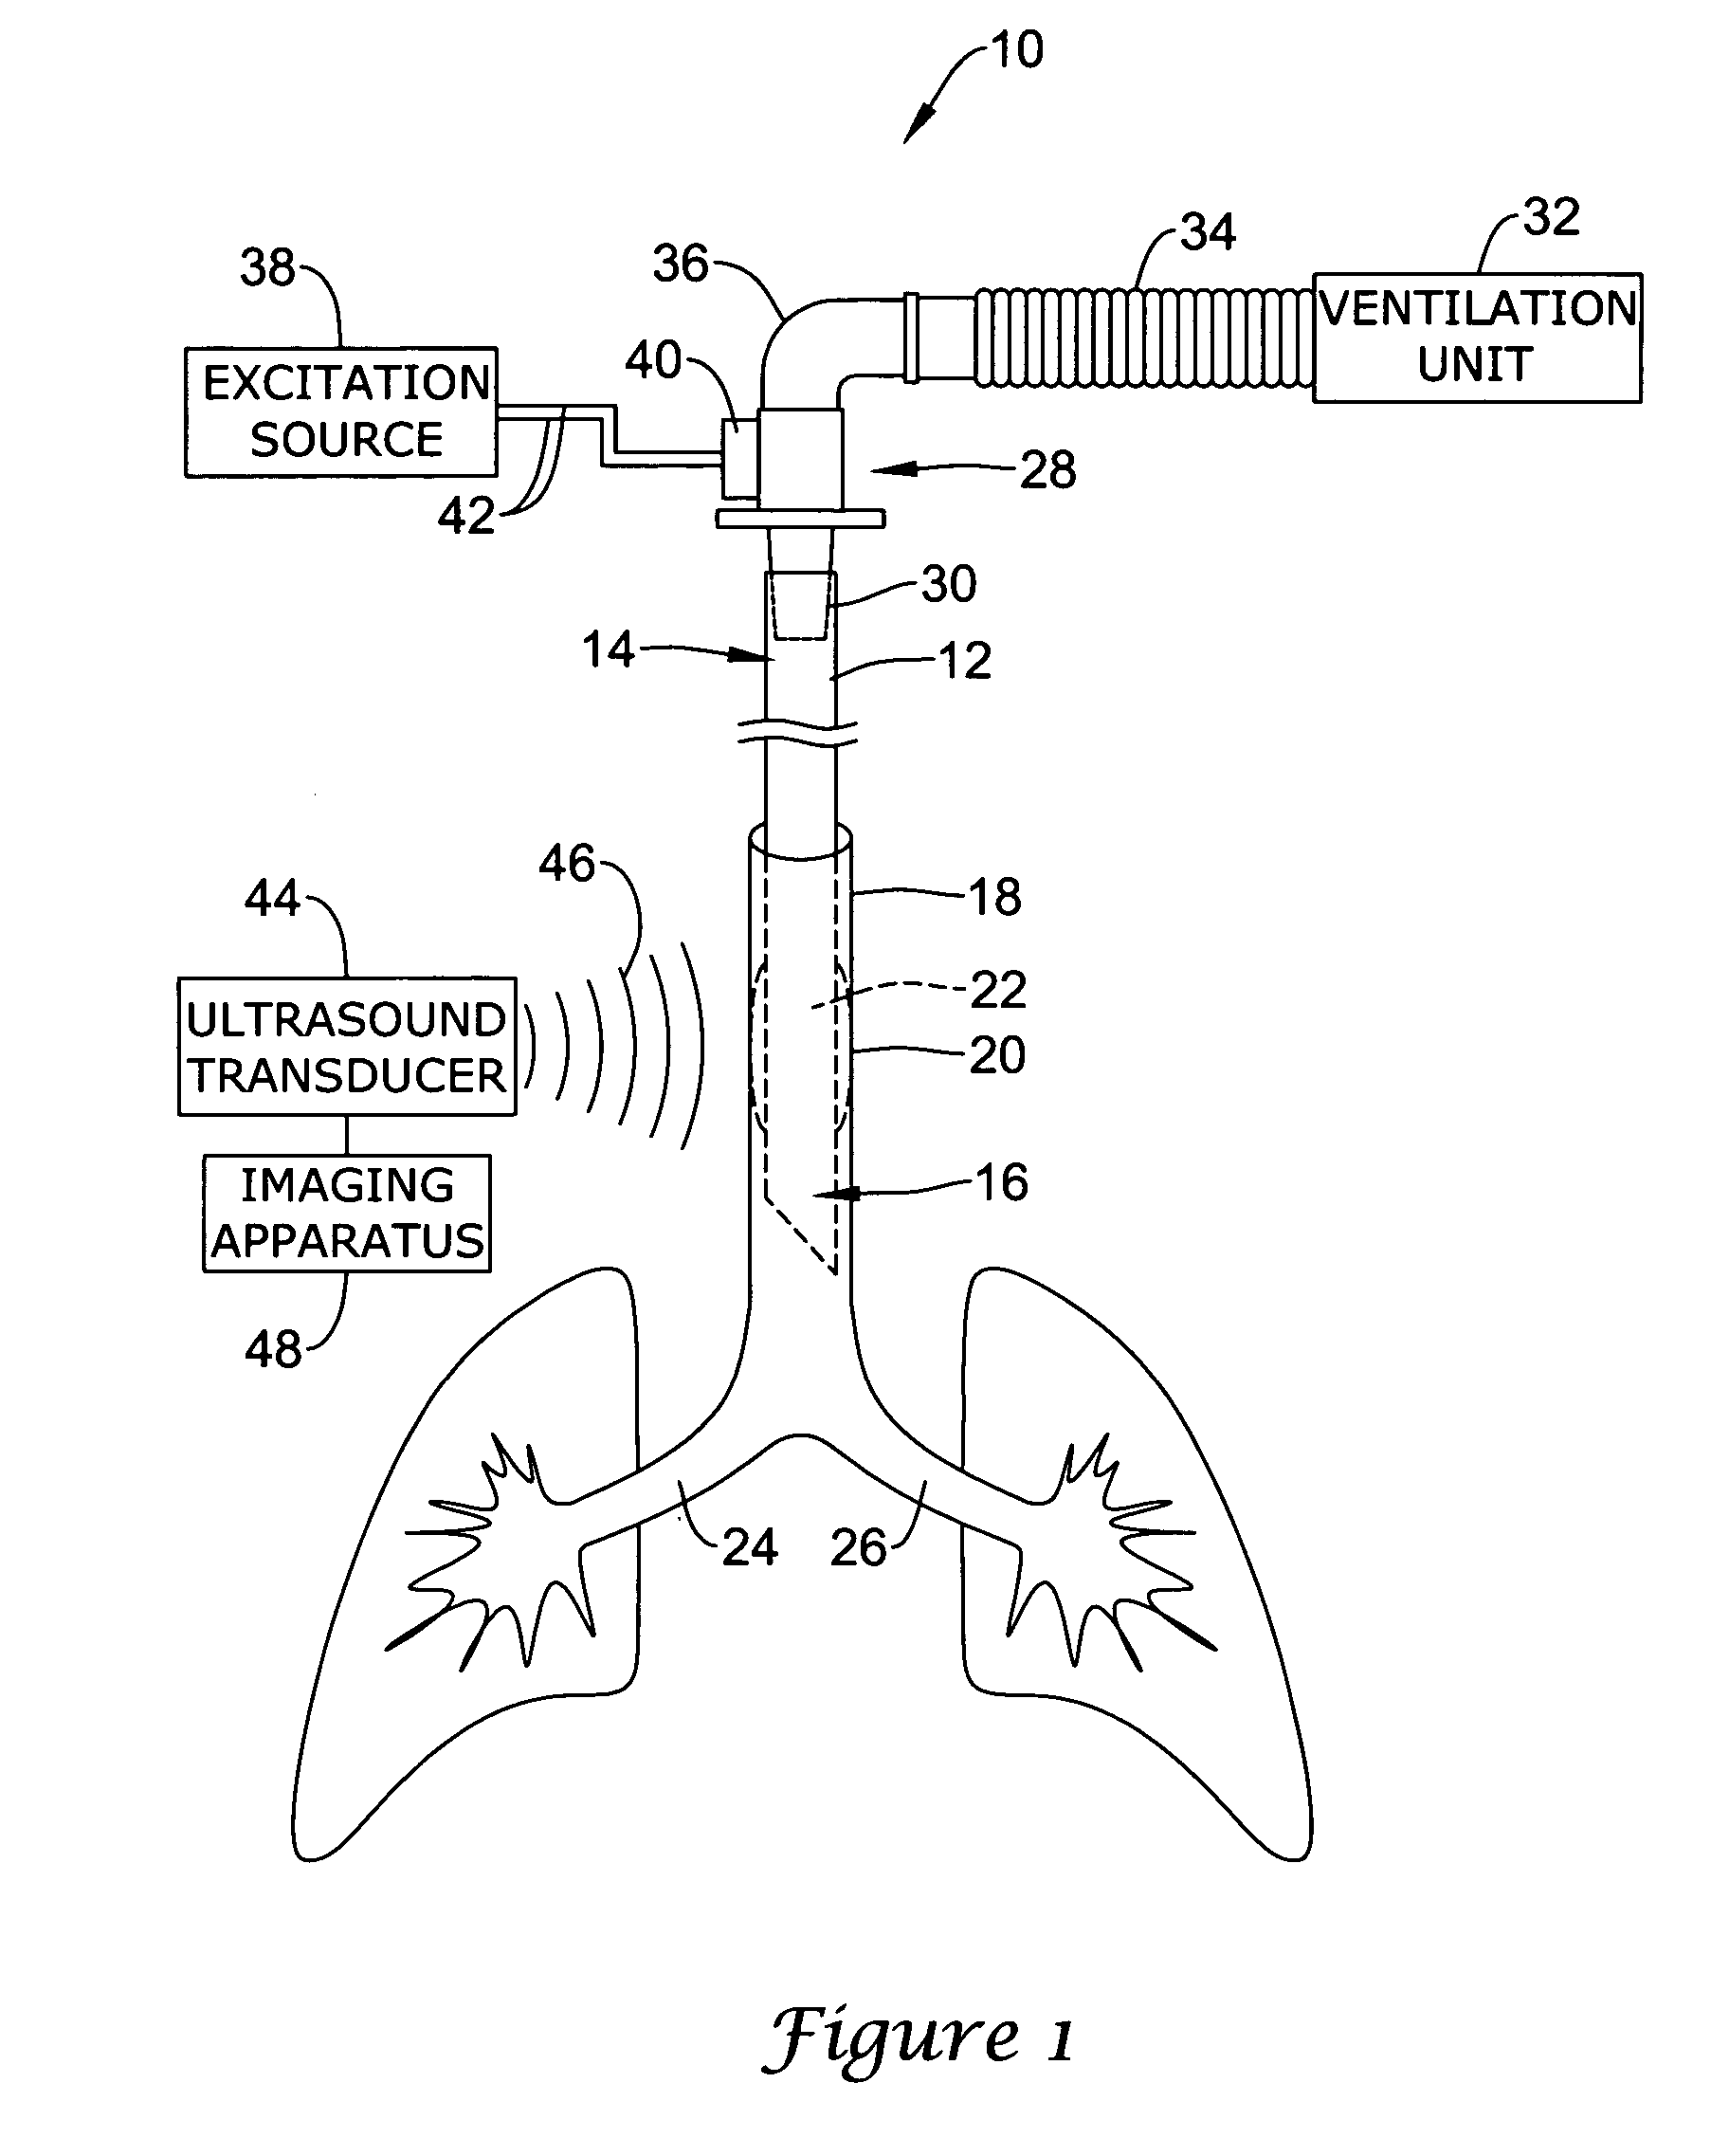 Ultrasonic placement and monitoring of an endotracheal tube